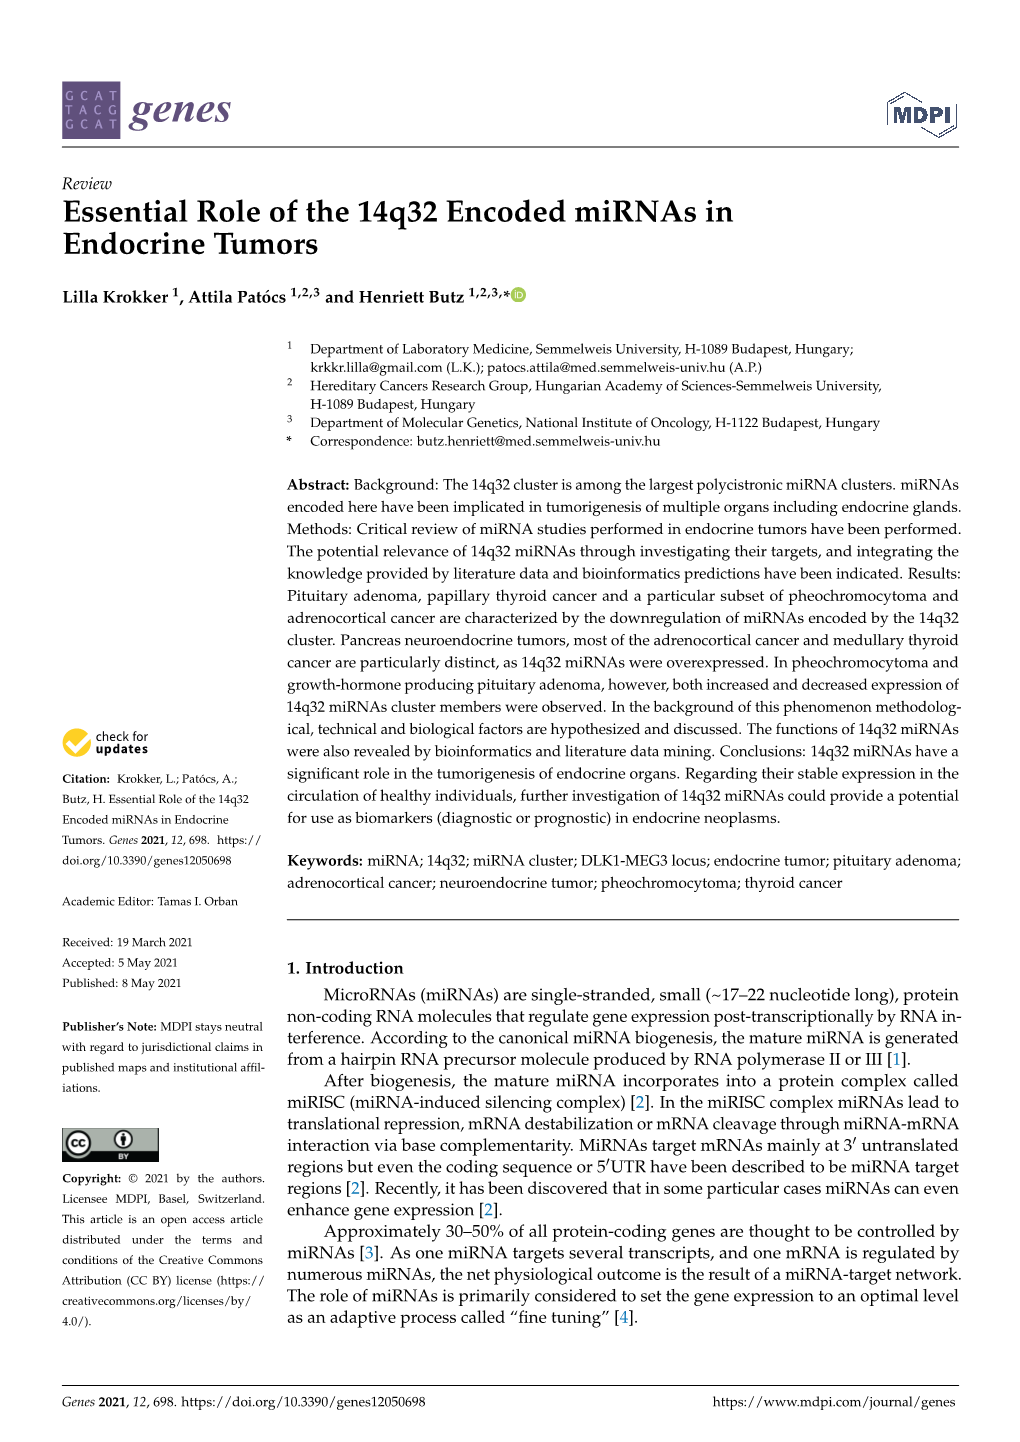 Essential Role of the 14Q32 Encoded Mirnas in Endocrine Tumors